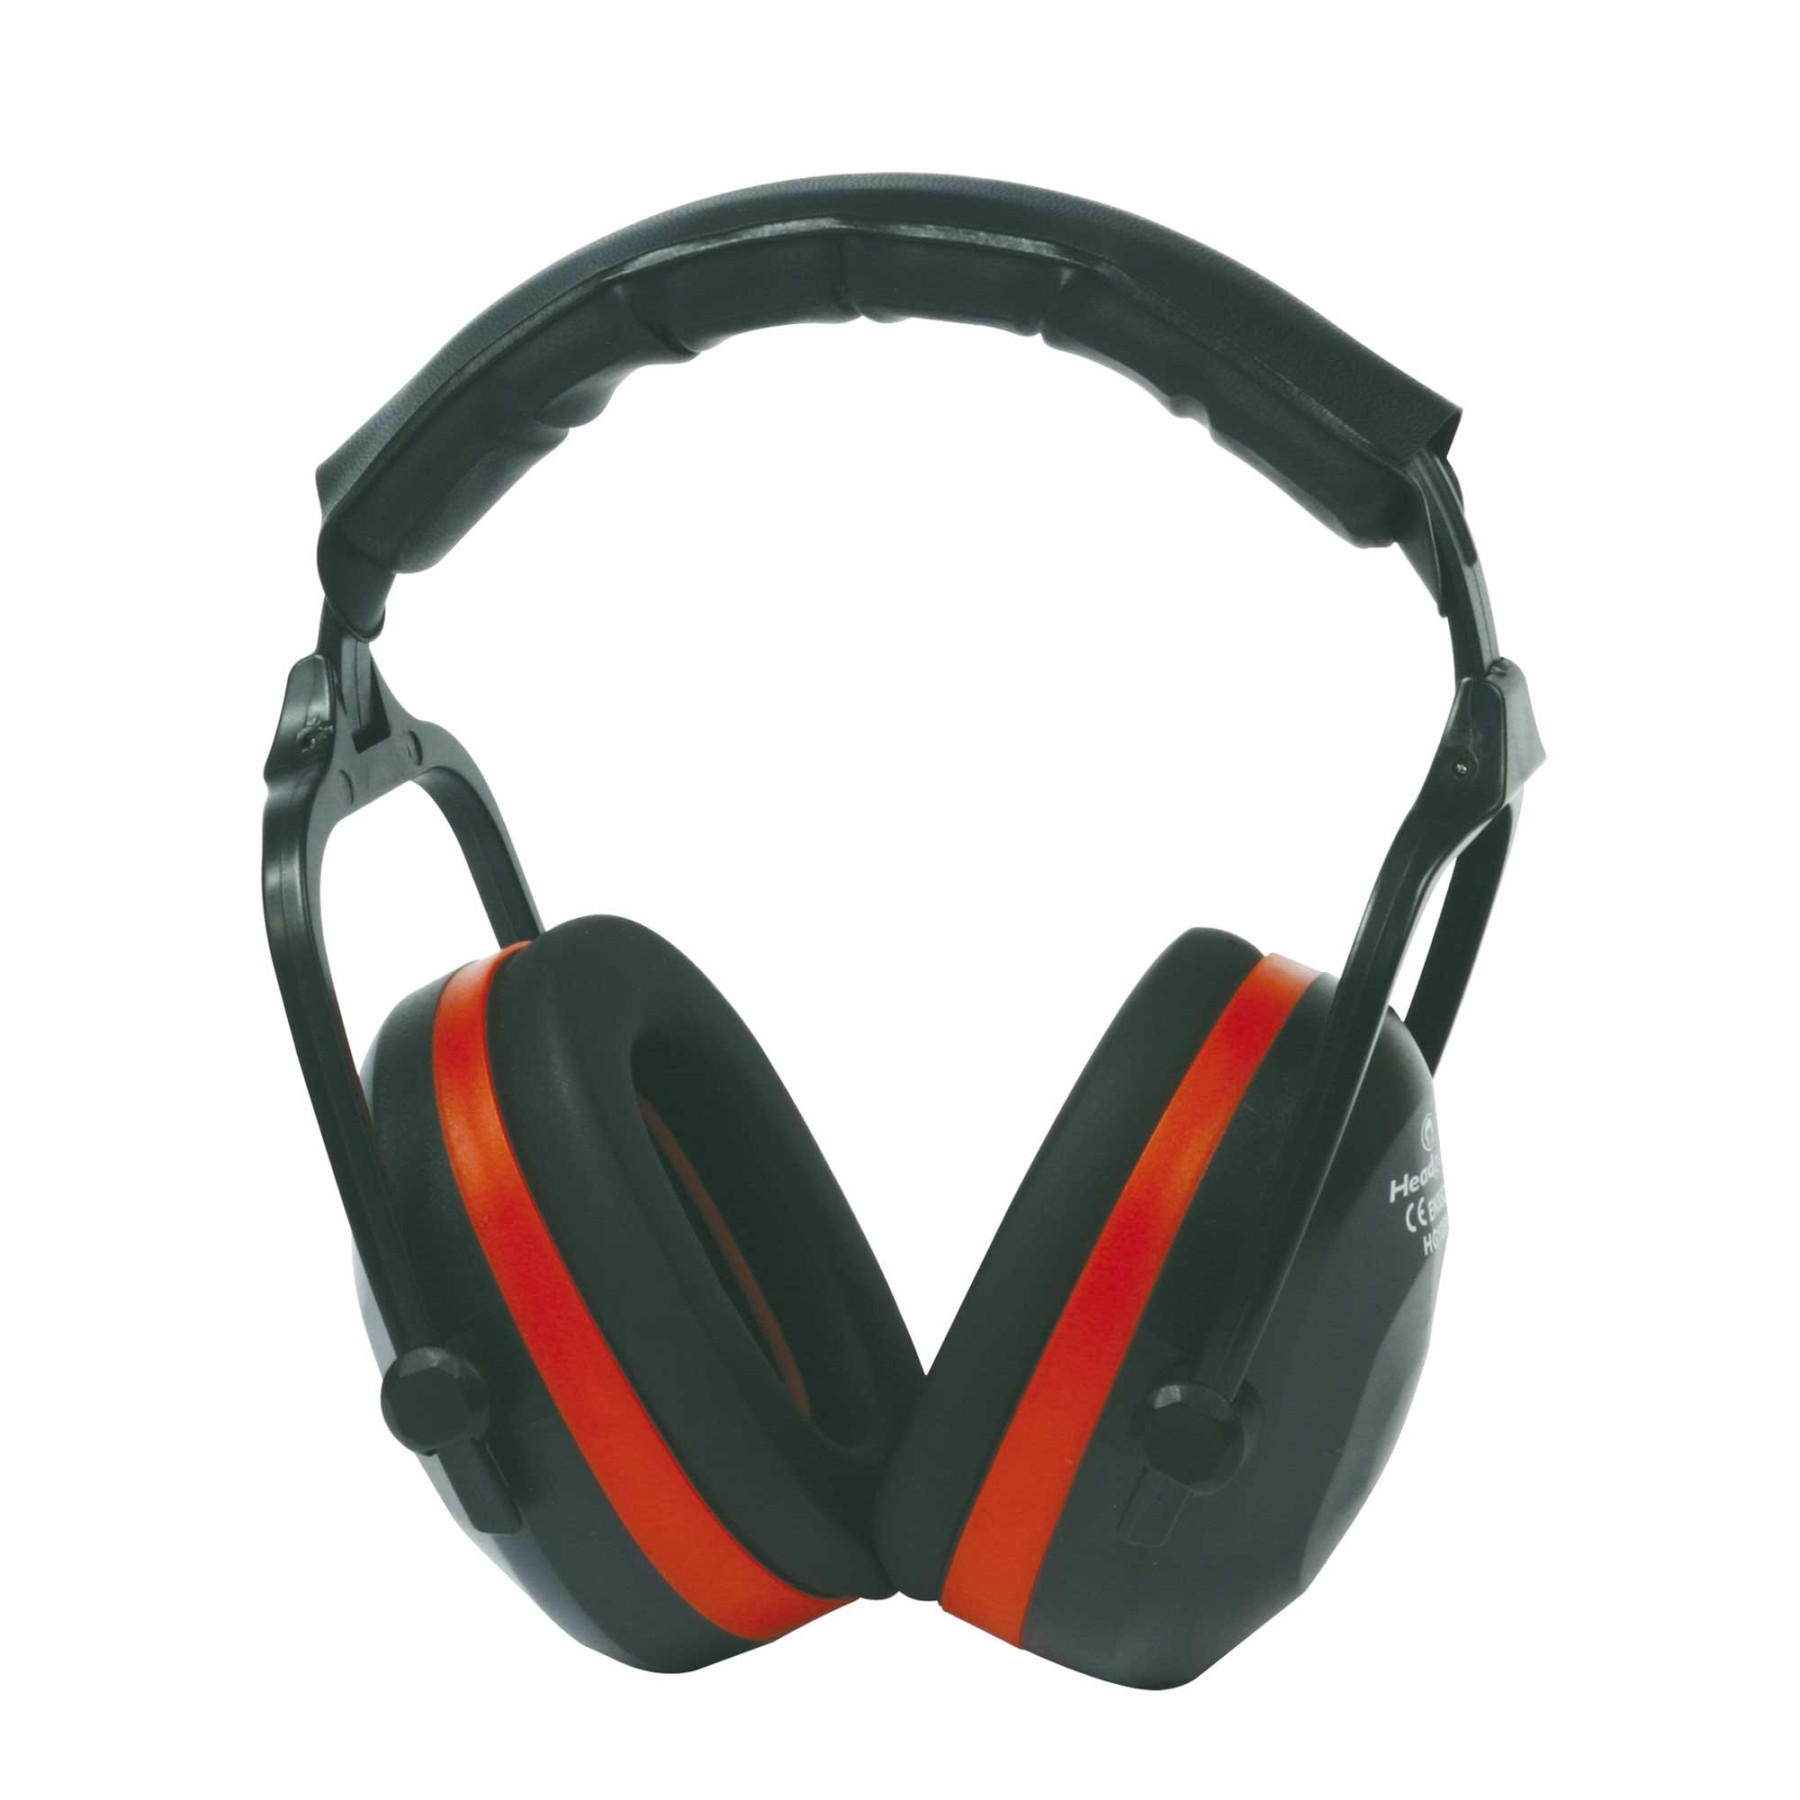 Casque antibruit « Compact », Protection auditive